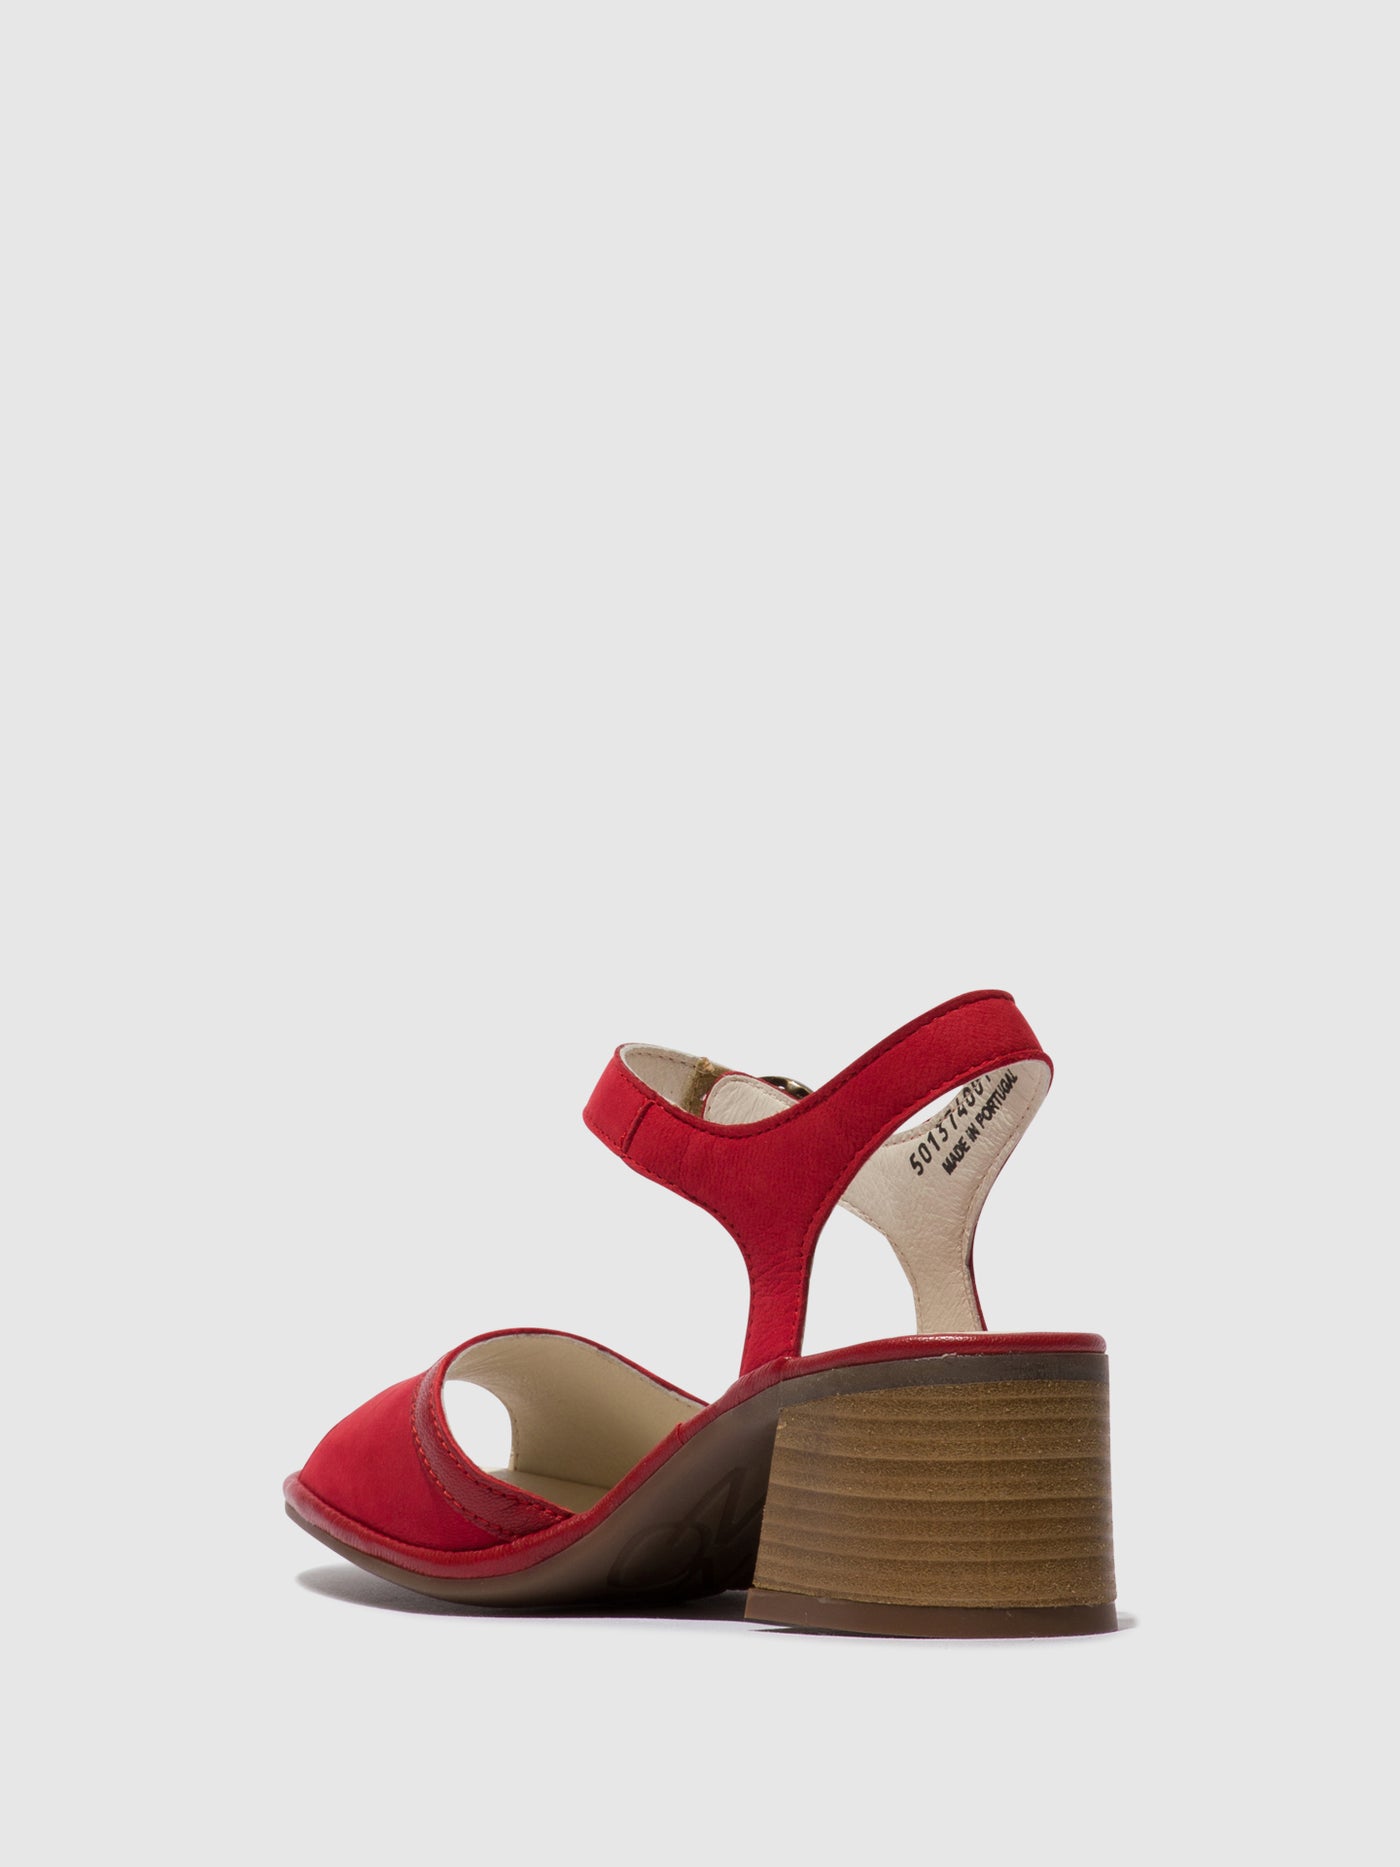 Ankle Strap Sandals LEAR374FLY LIPSTICK RED